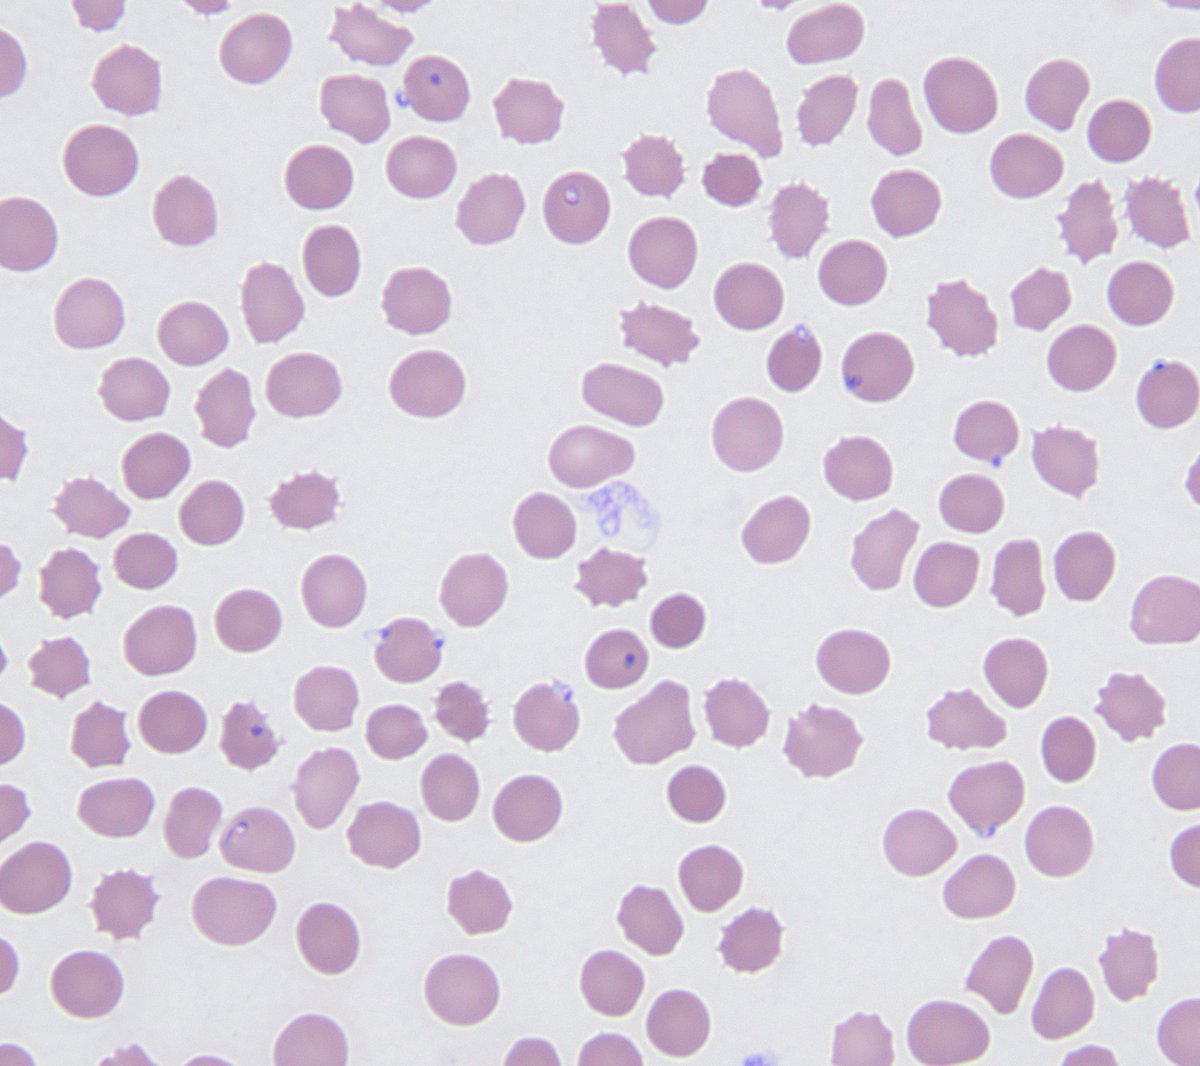 Patient presented to the ED 2 weeks after returning from Malawi with fever and AMS. Rapid influenzaA positive
…and then the smears came back…..
1) thick smear
2) thin smear
3) delayed sample-thin smear
#path2path #IDtwitter #tropicalmedicine #clinicalmicro #parasitology